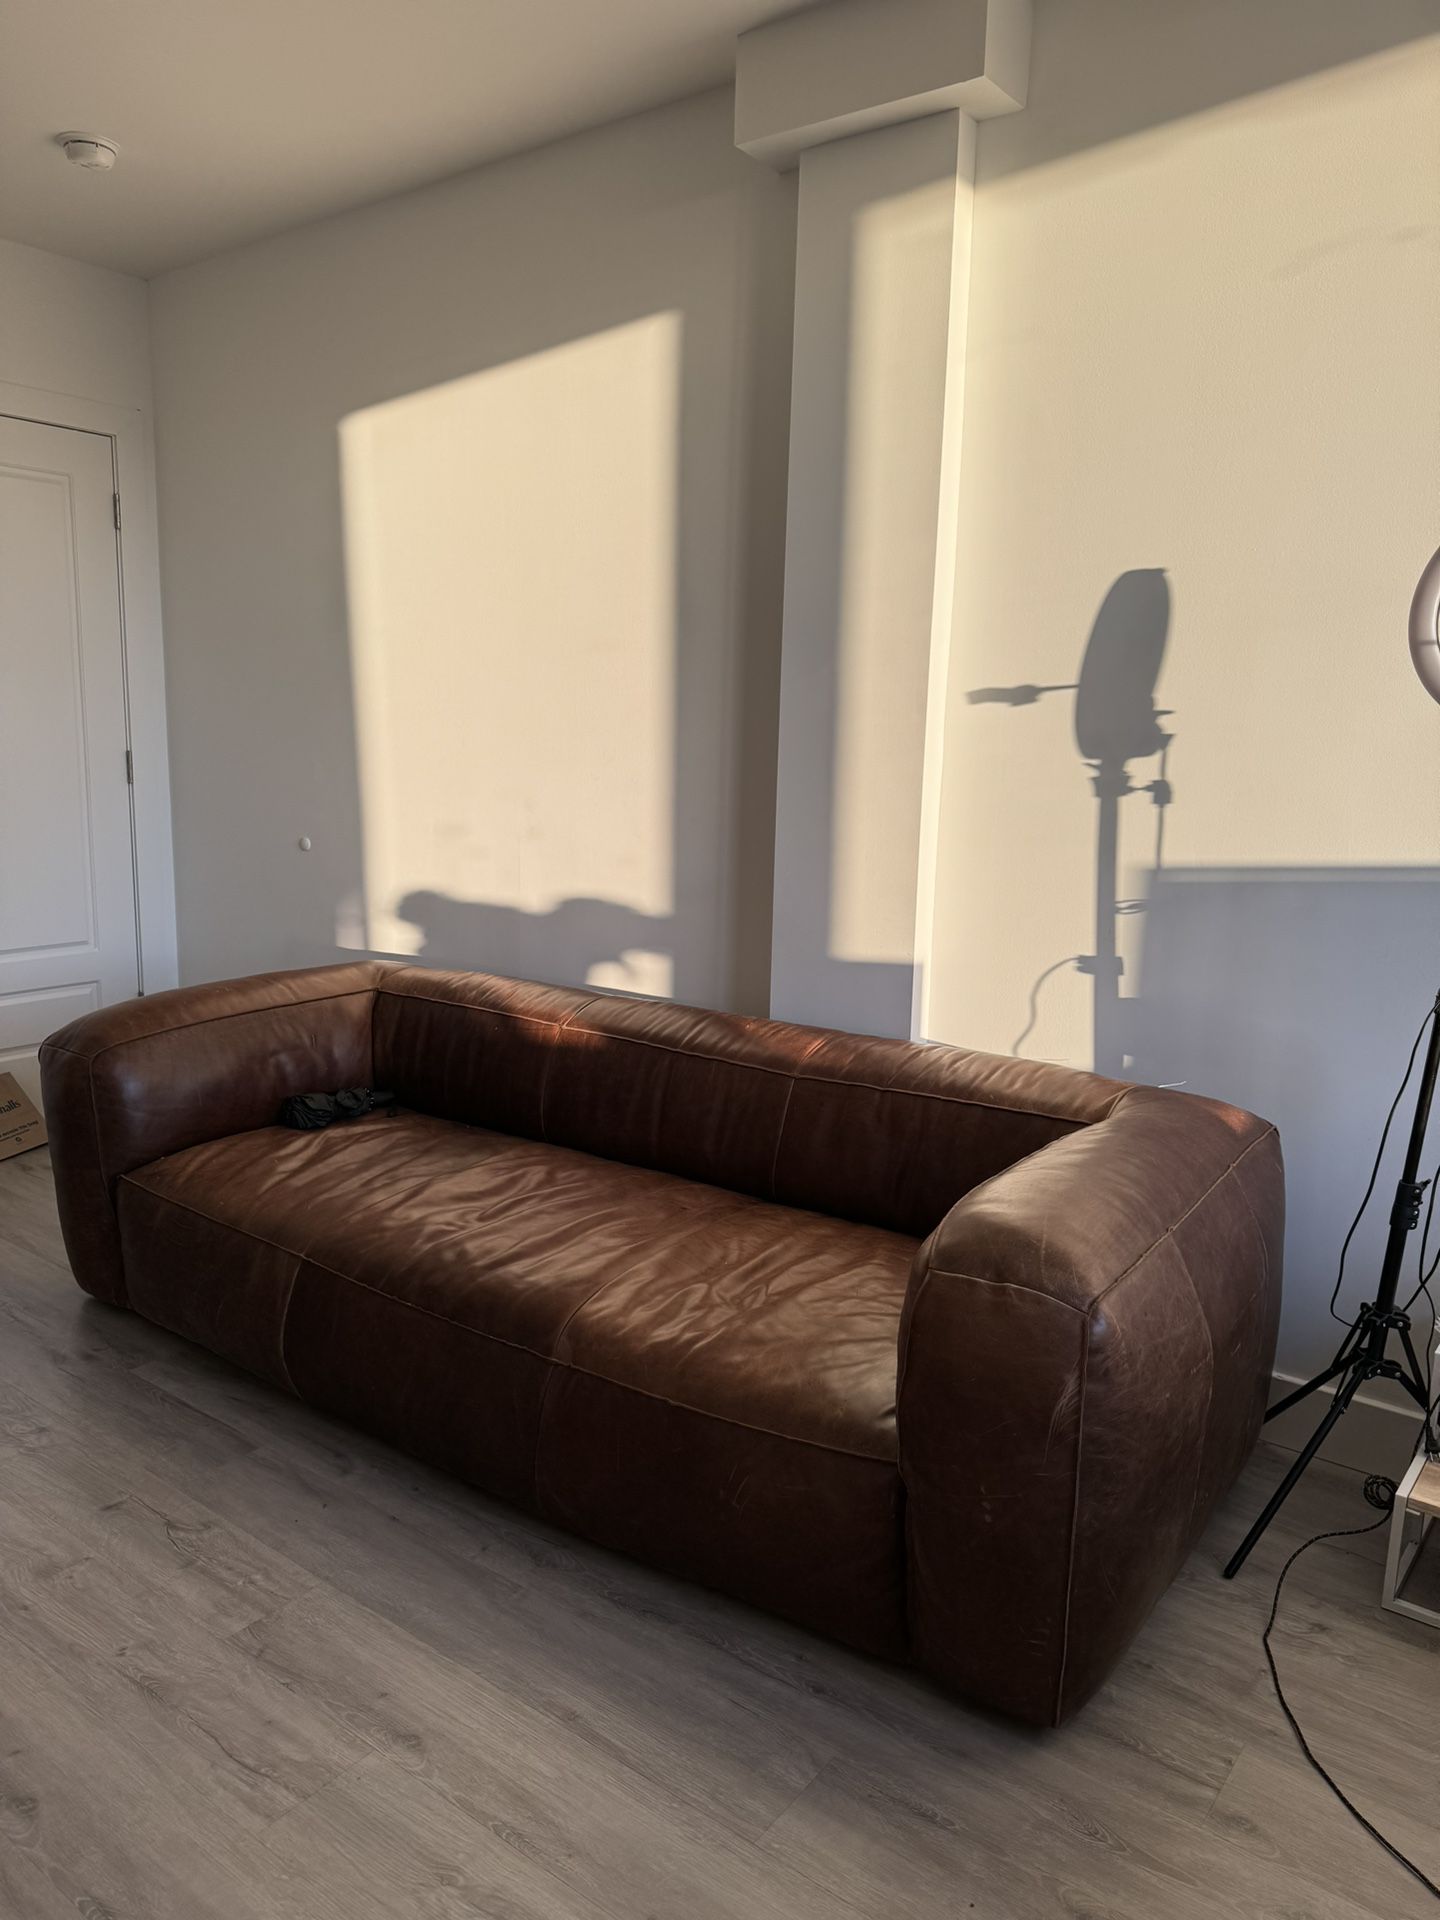 Italian Leather Couch 